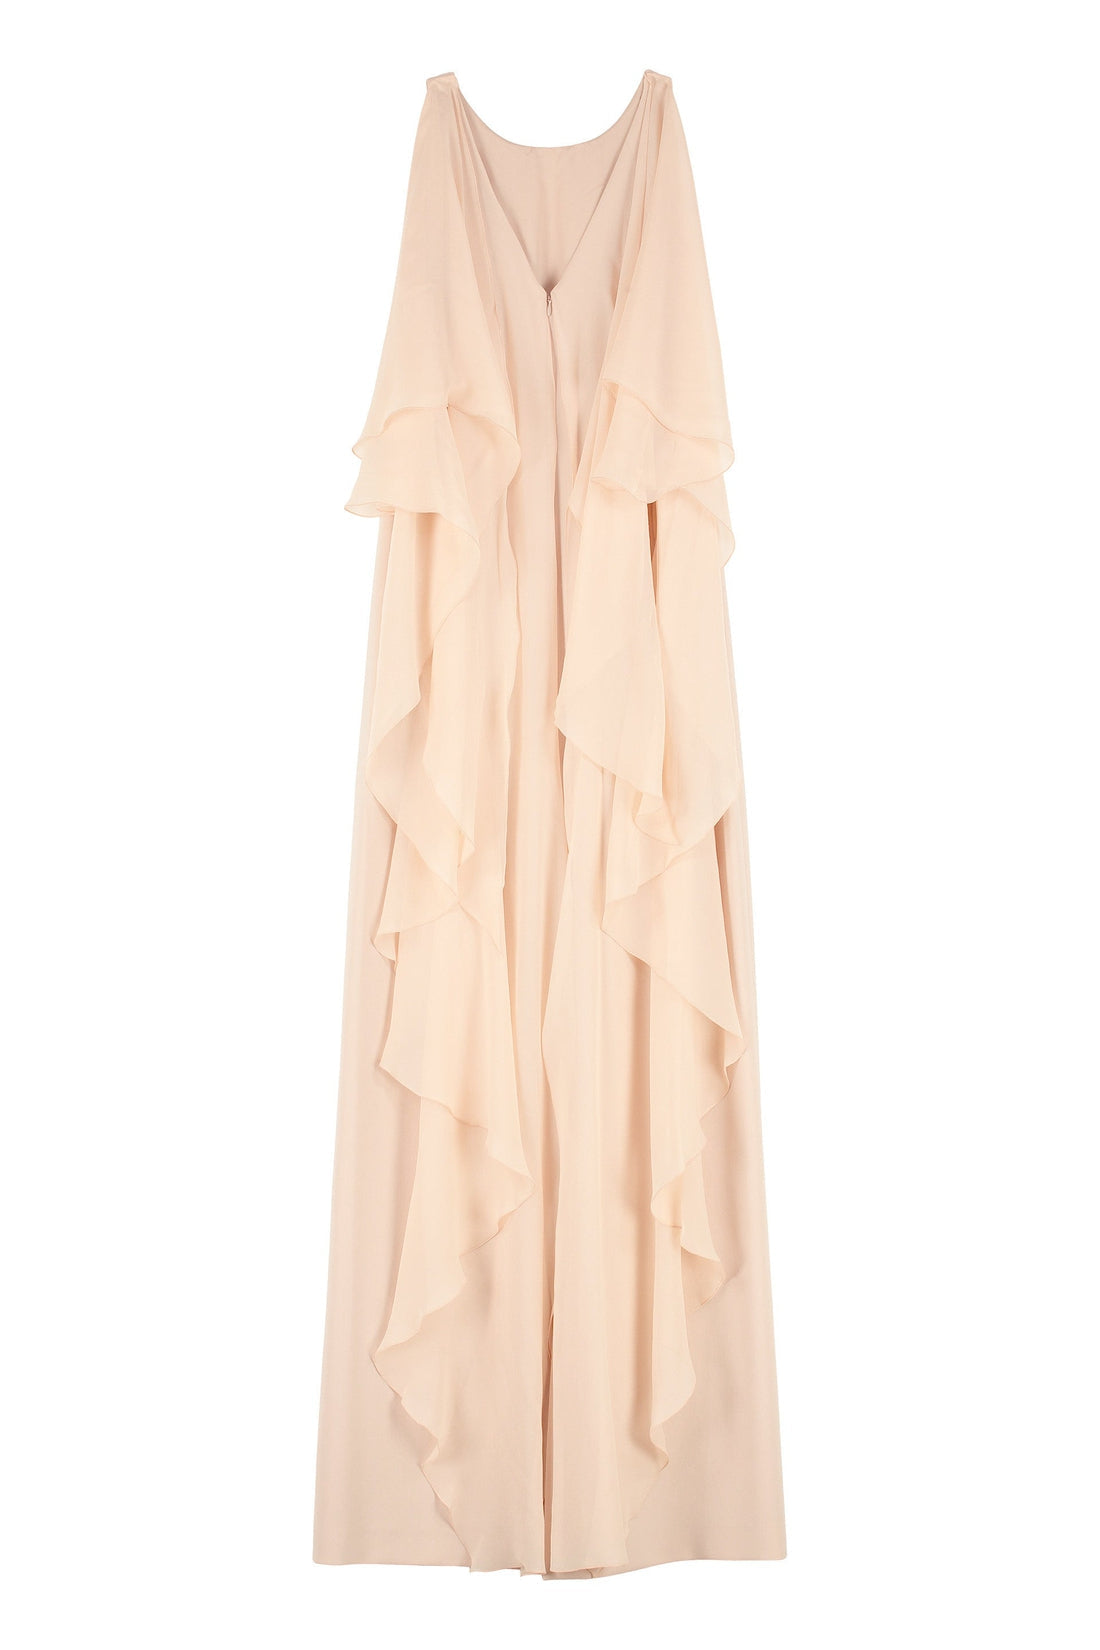 Max Mara-OUTLET-SALE-Dovere ruffled cady dress-ARCHIVIST